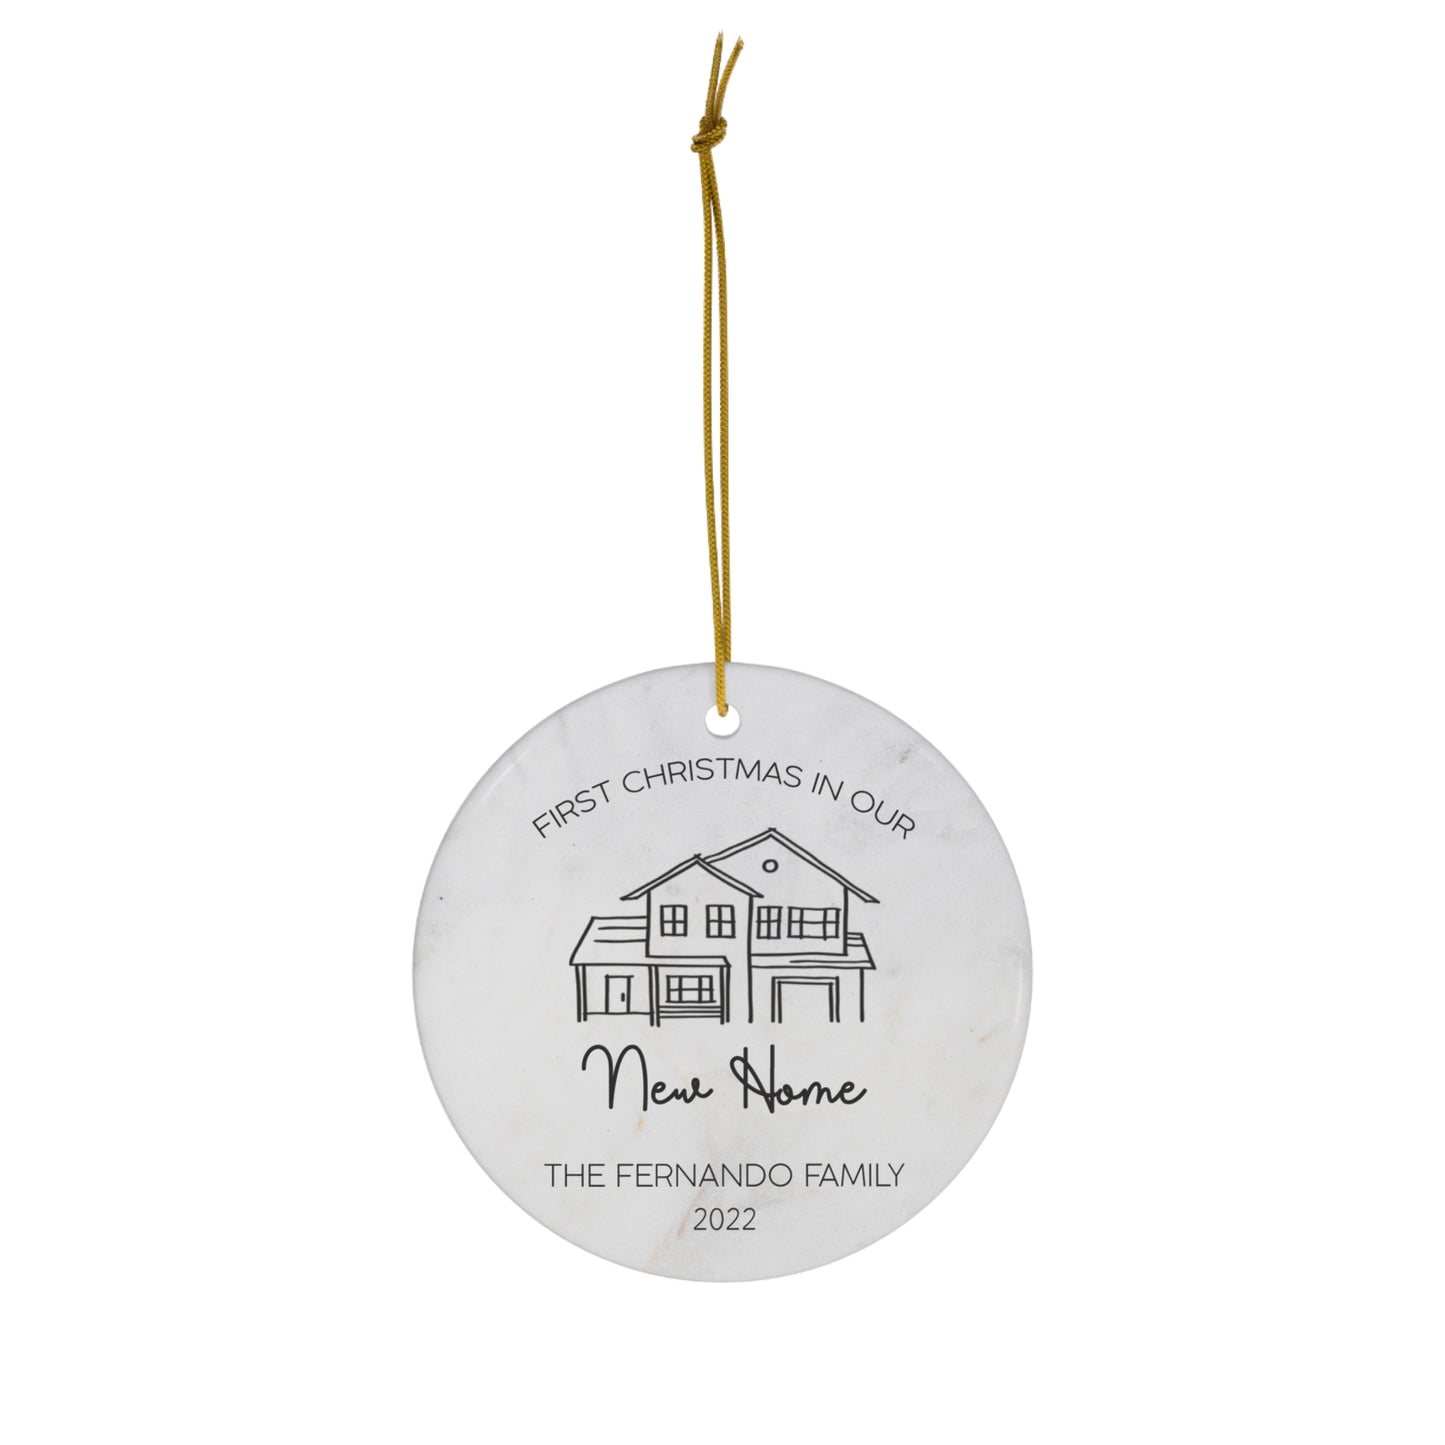 New Home Christmas Ornament - First Christmas in our New Home 2022